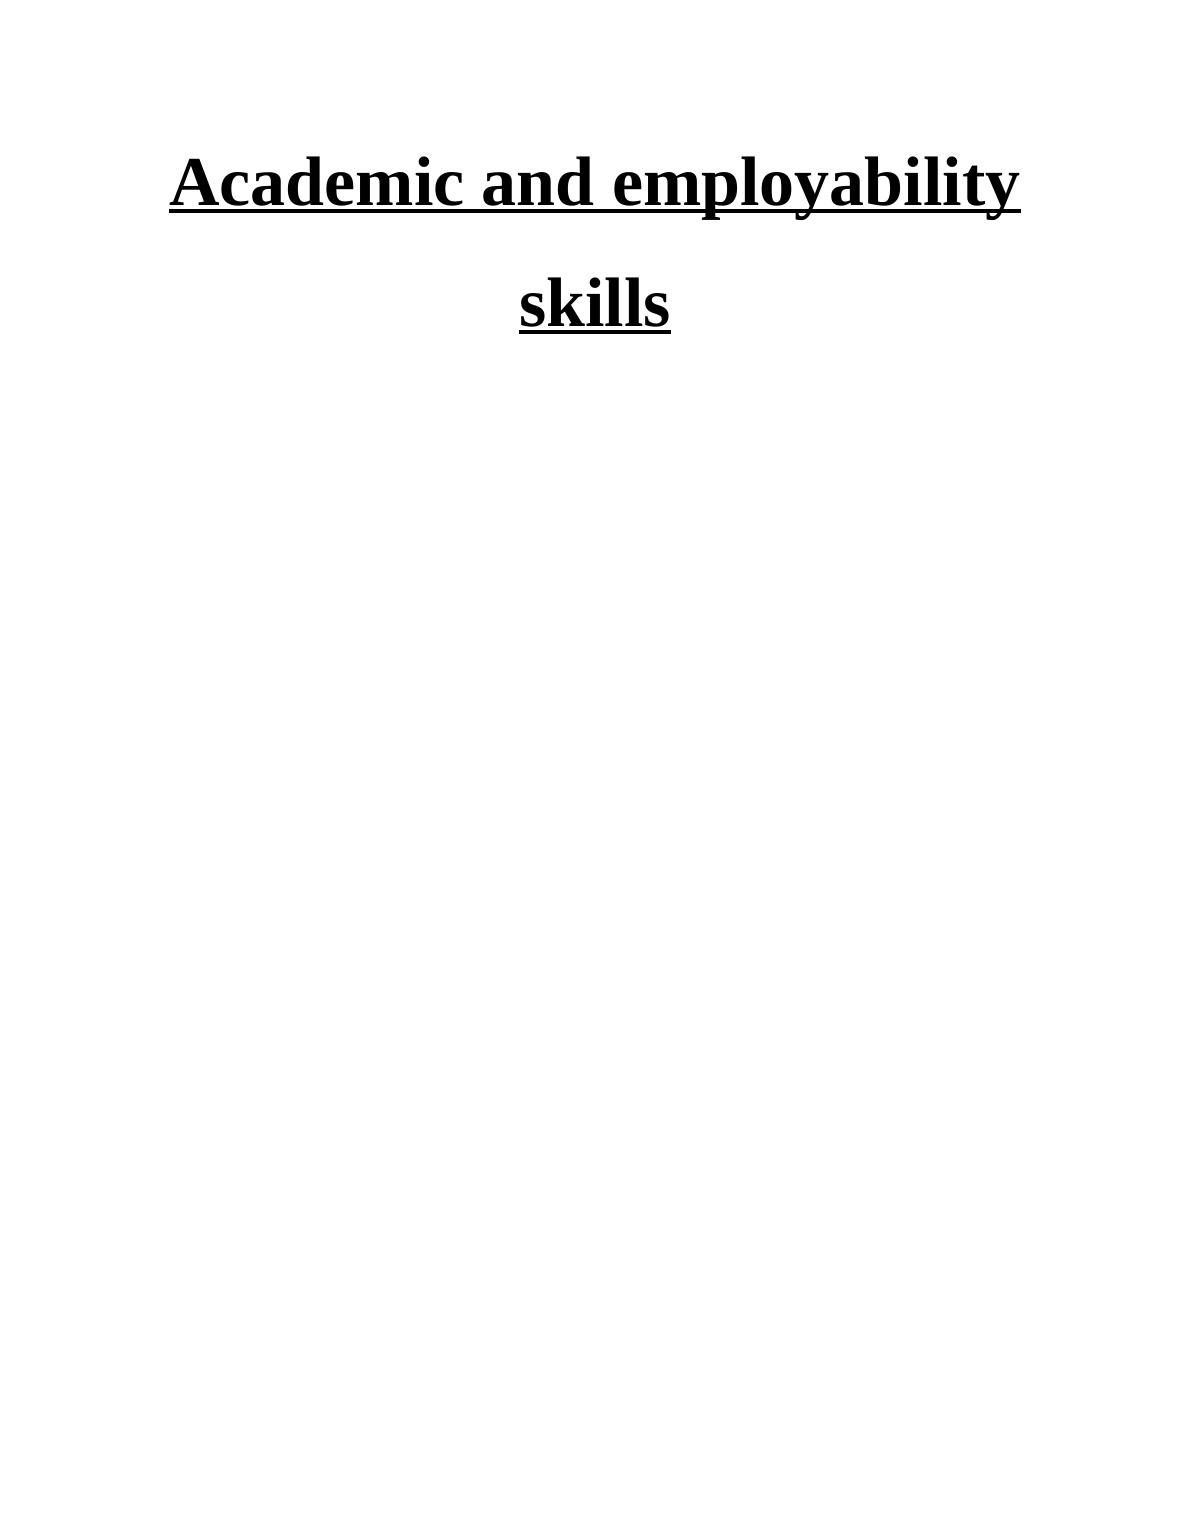 Academic and Employability Skills Assignment_1